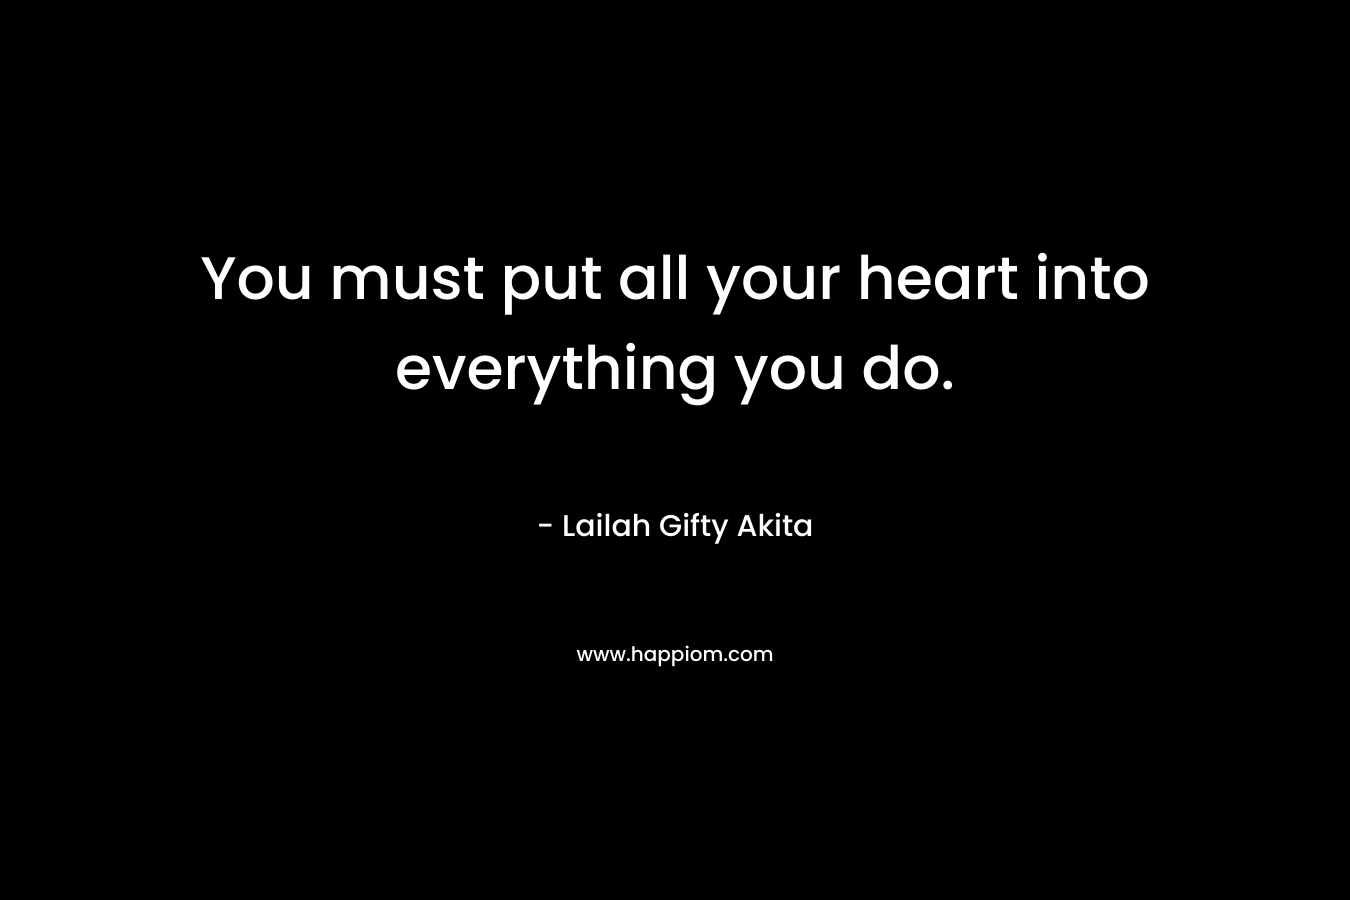 You must put all your heart into everything you do.